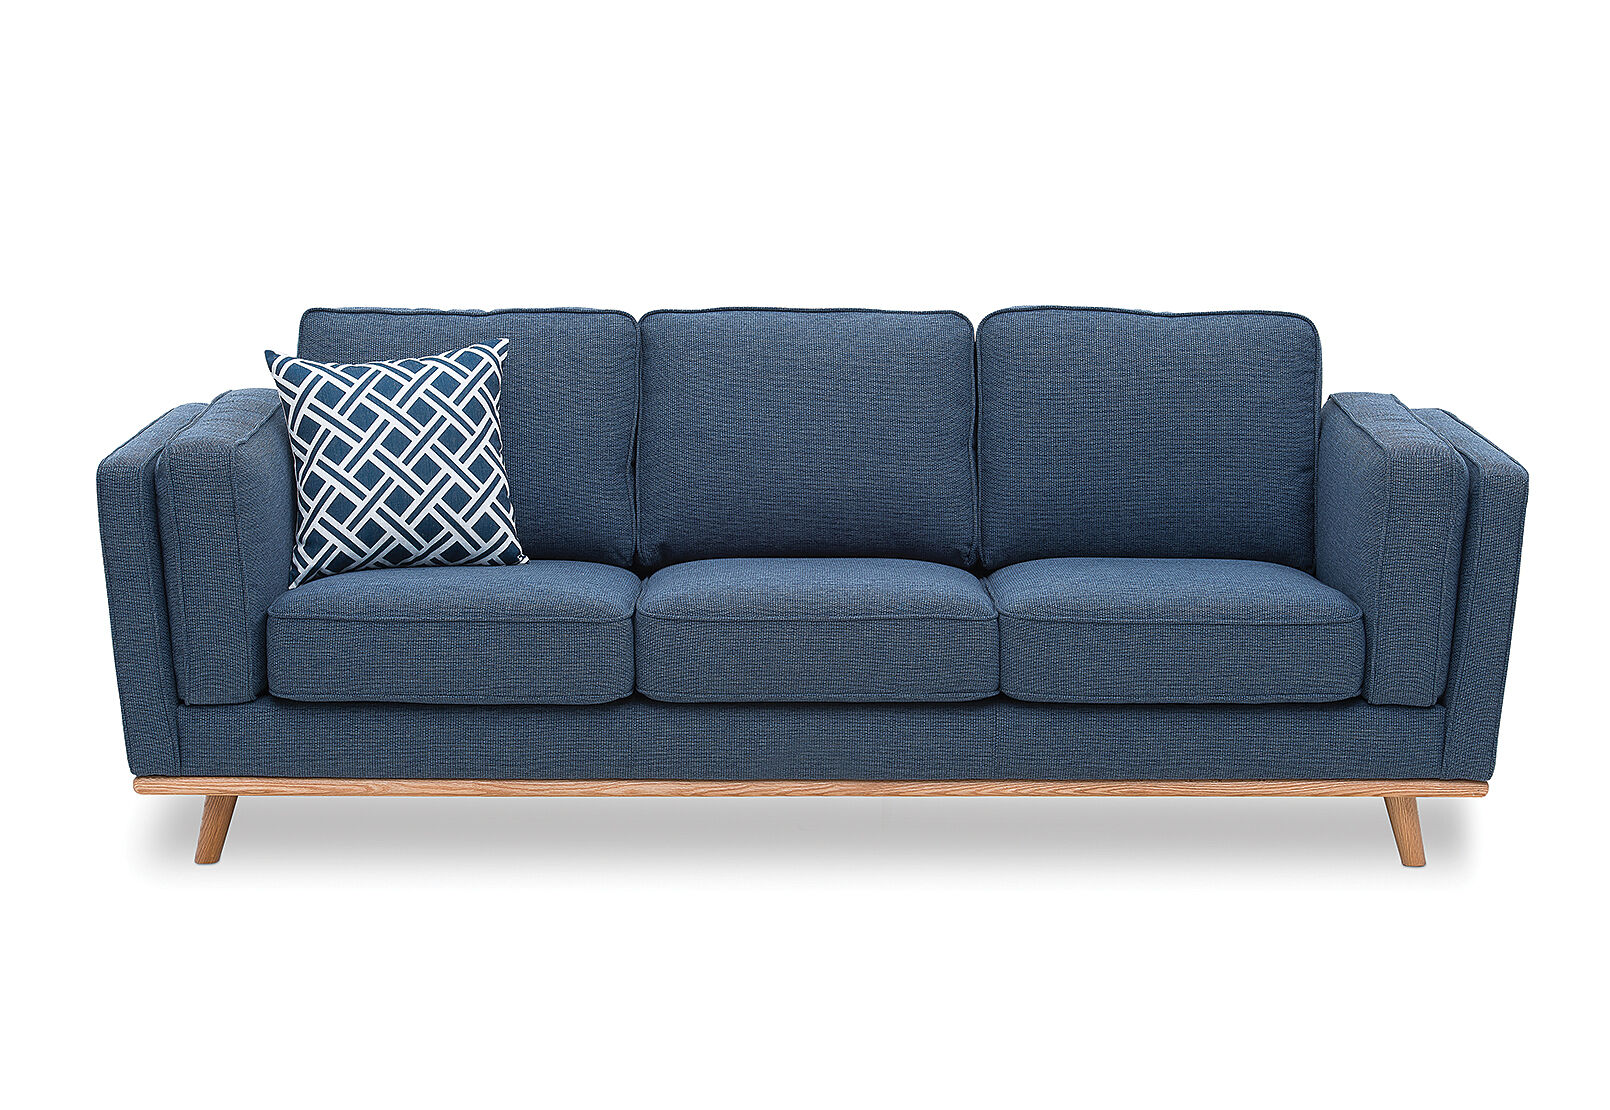 Blue Loras Fabric 3 Seater Sofa Amart, How Much Fabric To Cover A Three Seater Sofa